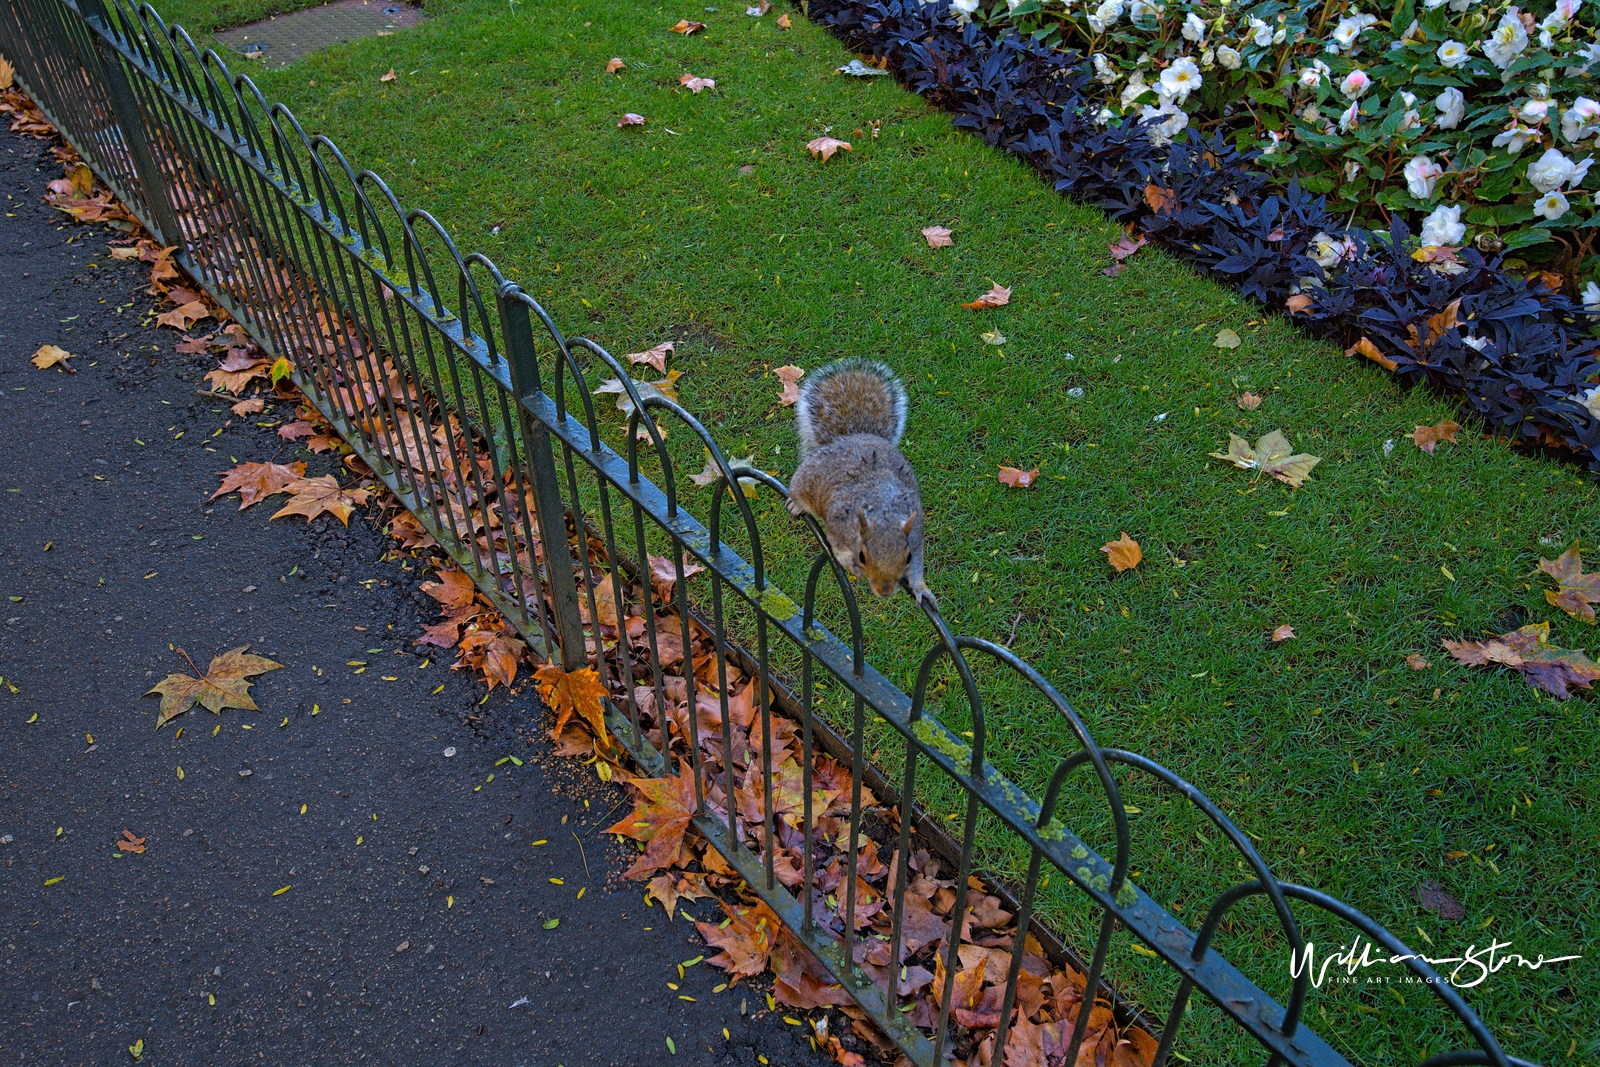 Fine Art, Limited Edition, Squirrel Away, London.